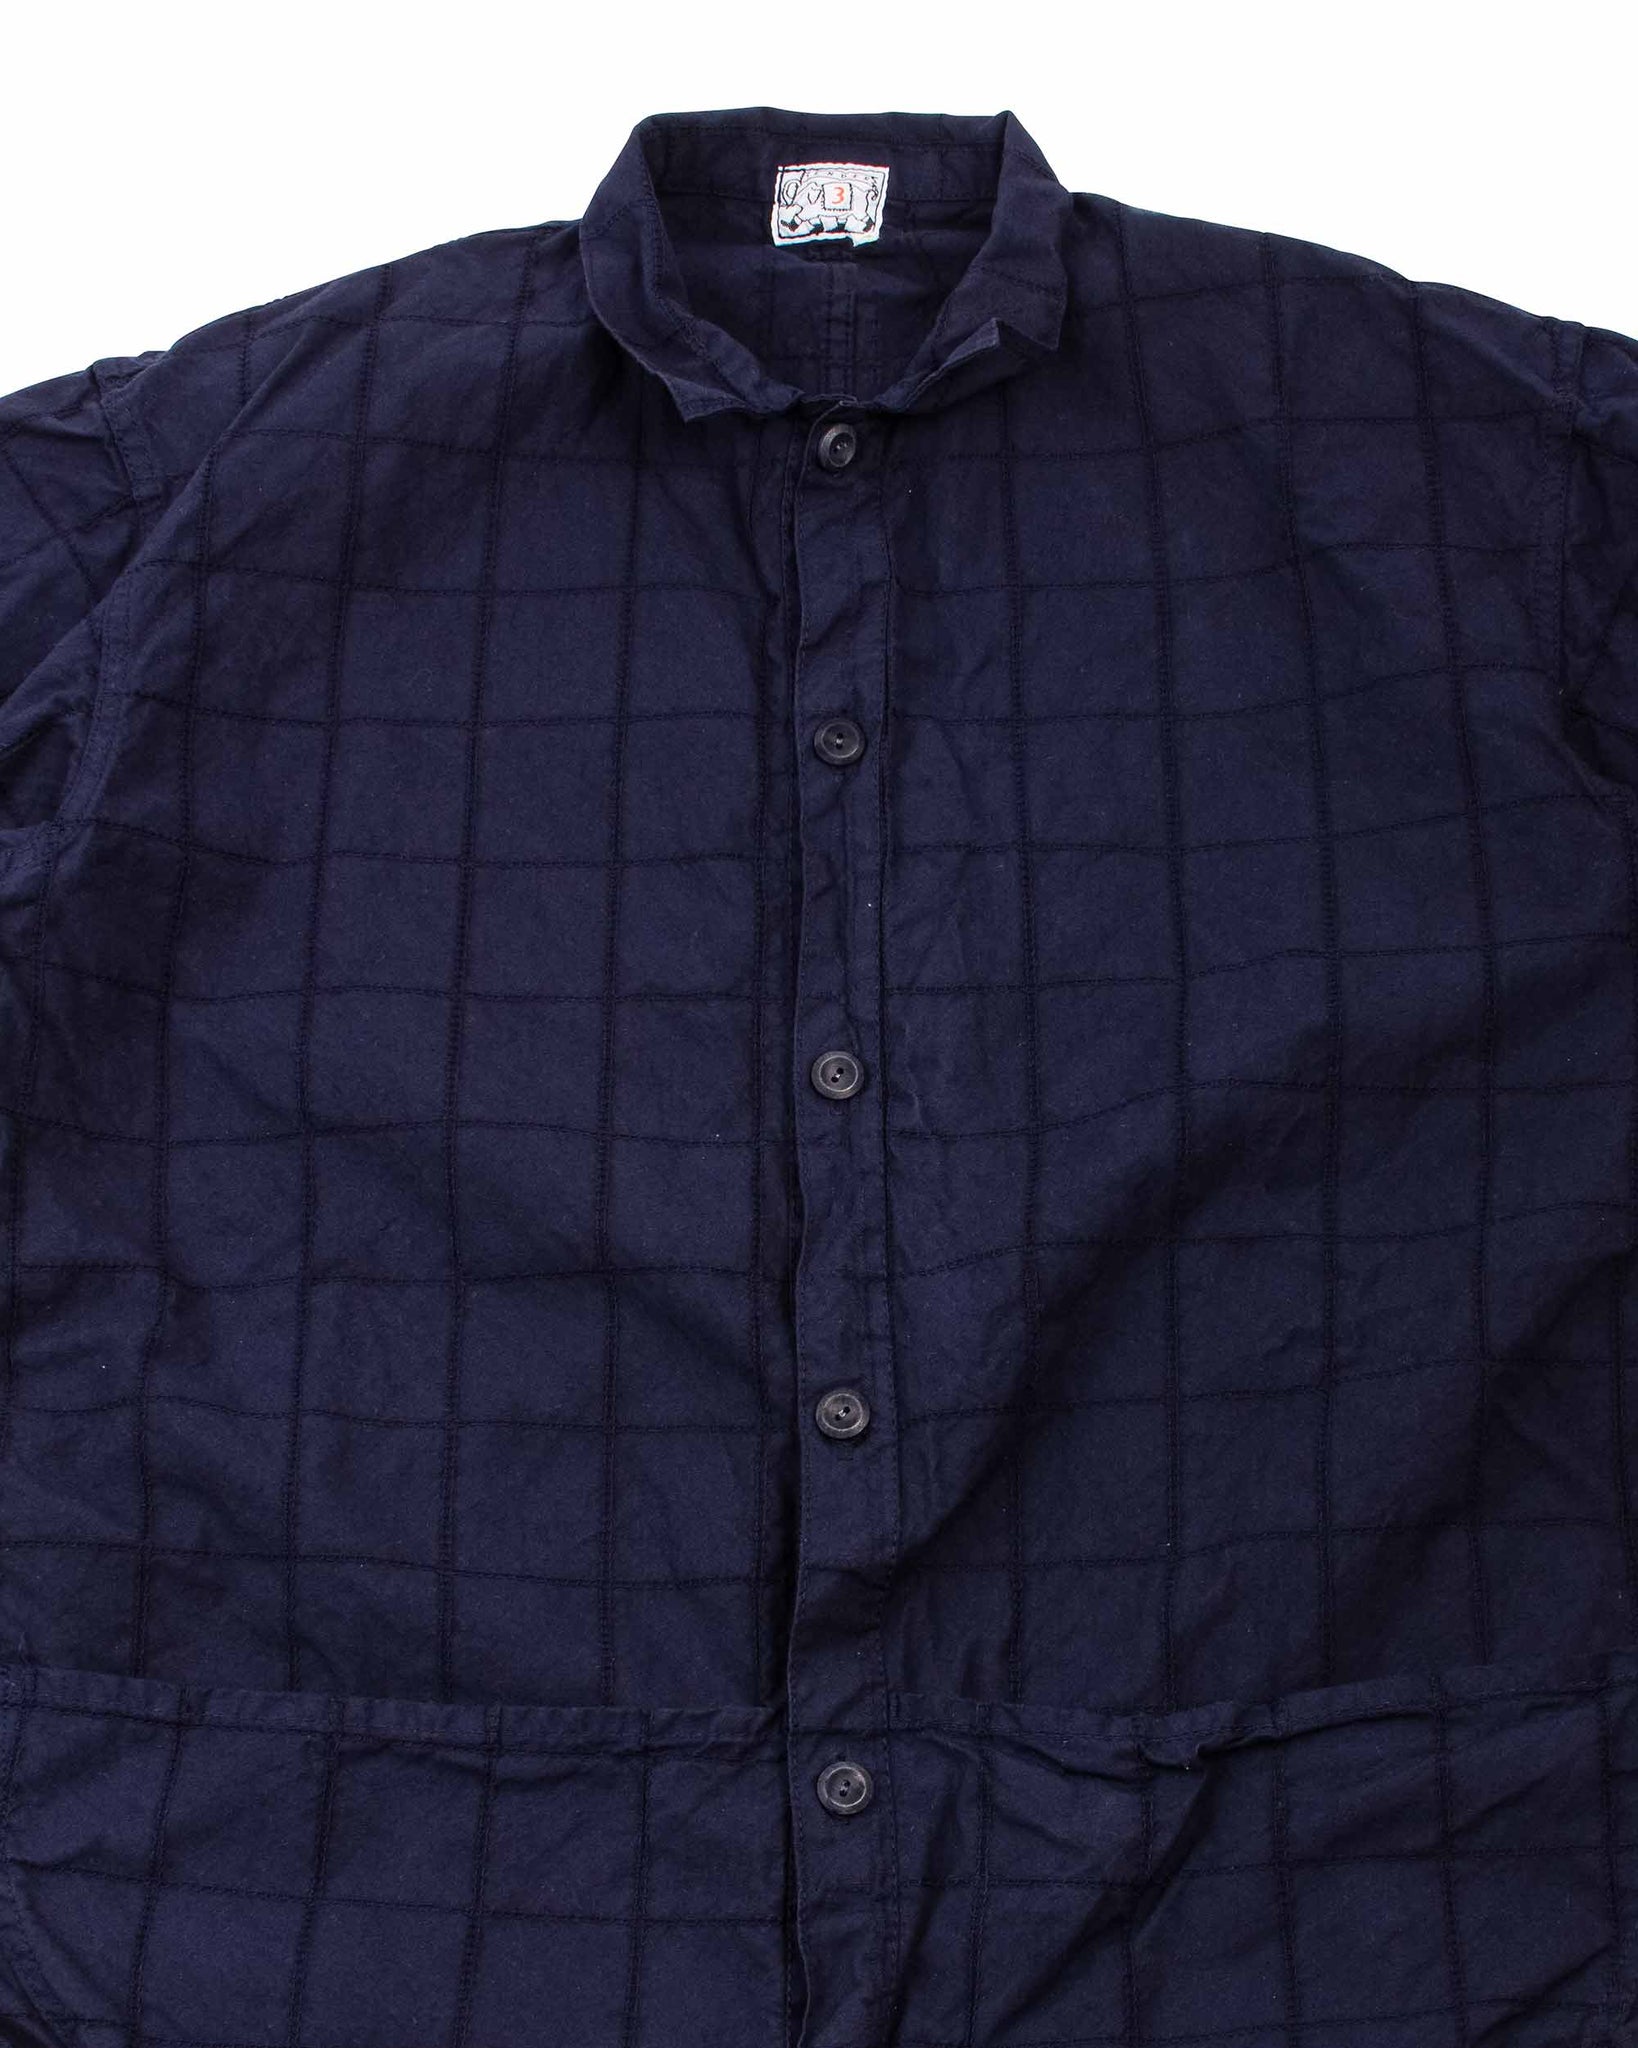 Tender Type 443 Short Sleeve Compass Pocket Shirt Beekeeper's Check Cotton Calico Hadal Blue Details